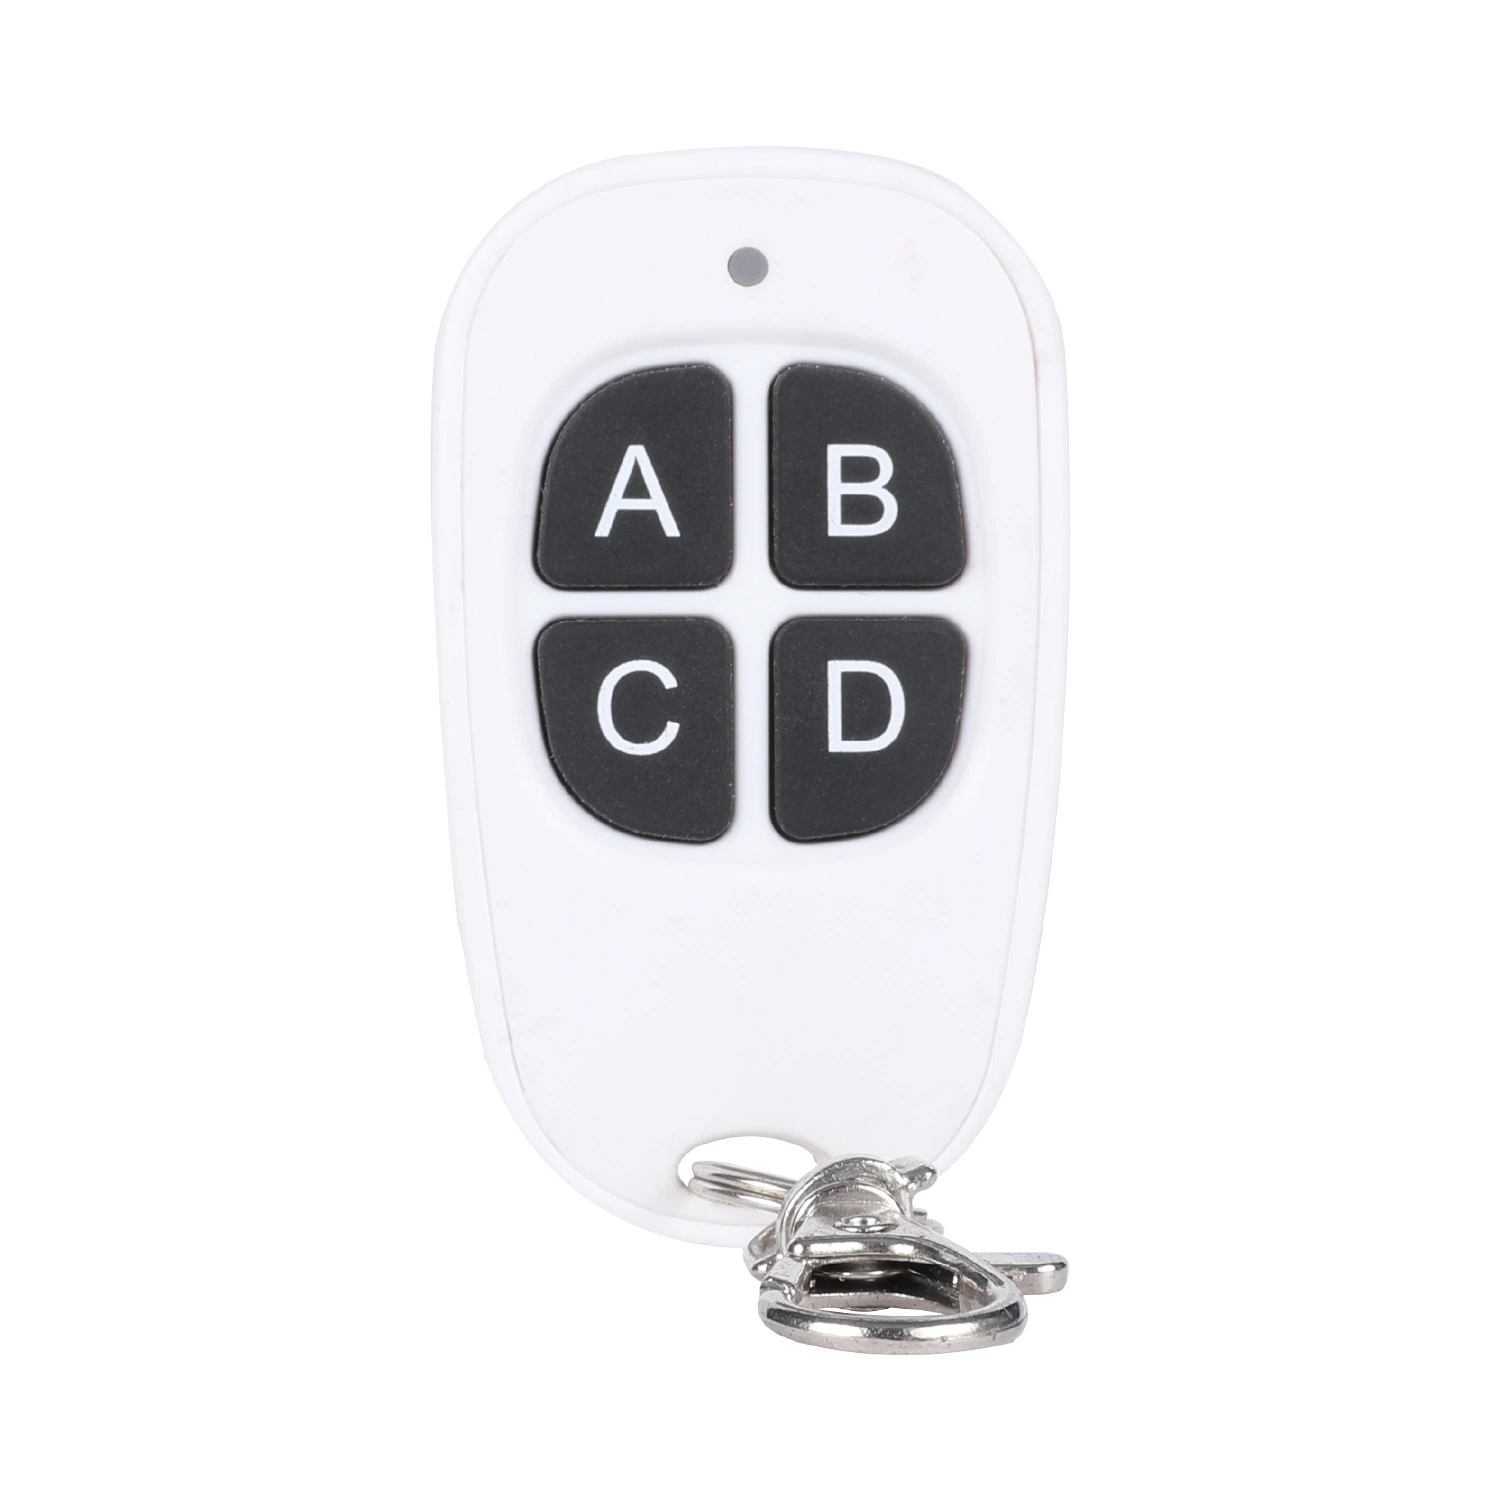 433MHz Universal Wireless RF Auto Gate Remote Control China Wireless Learning Code Transmitter